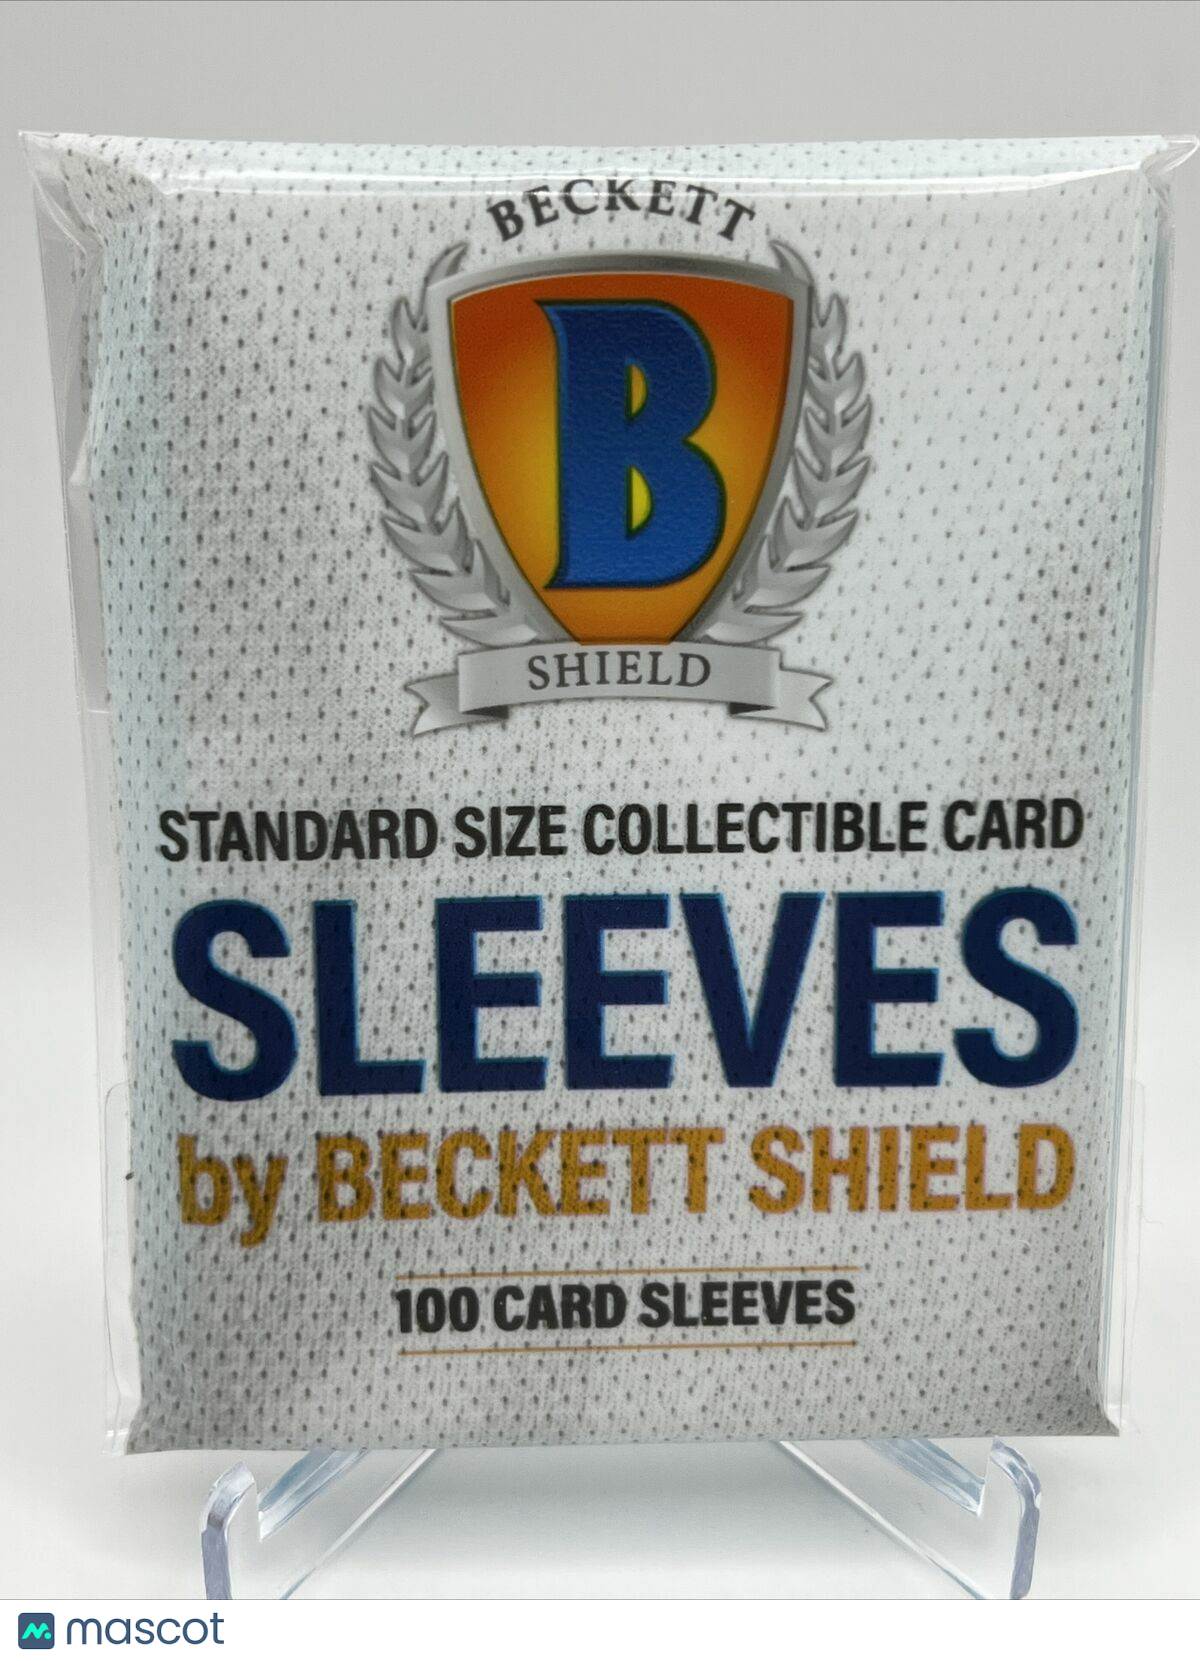 Beckett Shield Soft Penny Card Sleeves 100 Packs of 100 Sleeves Standard Cards